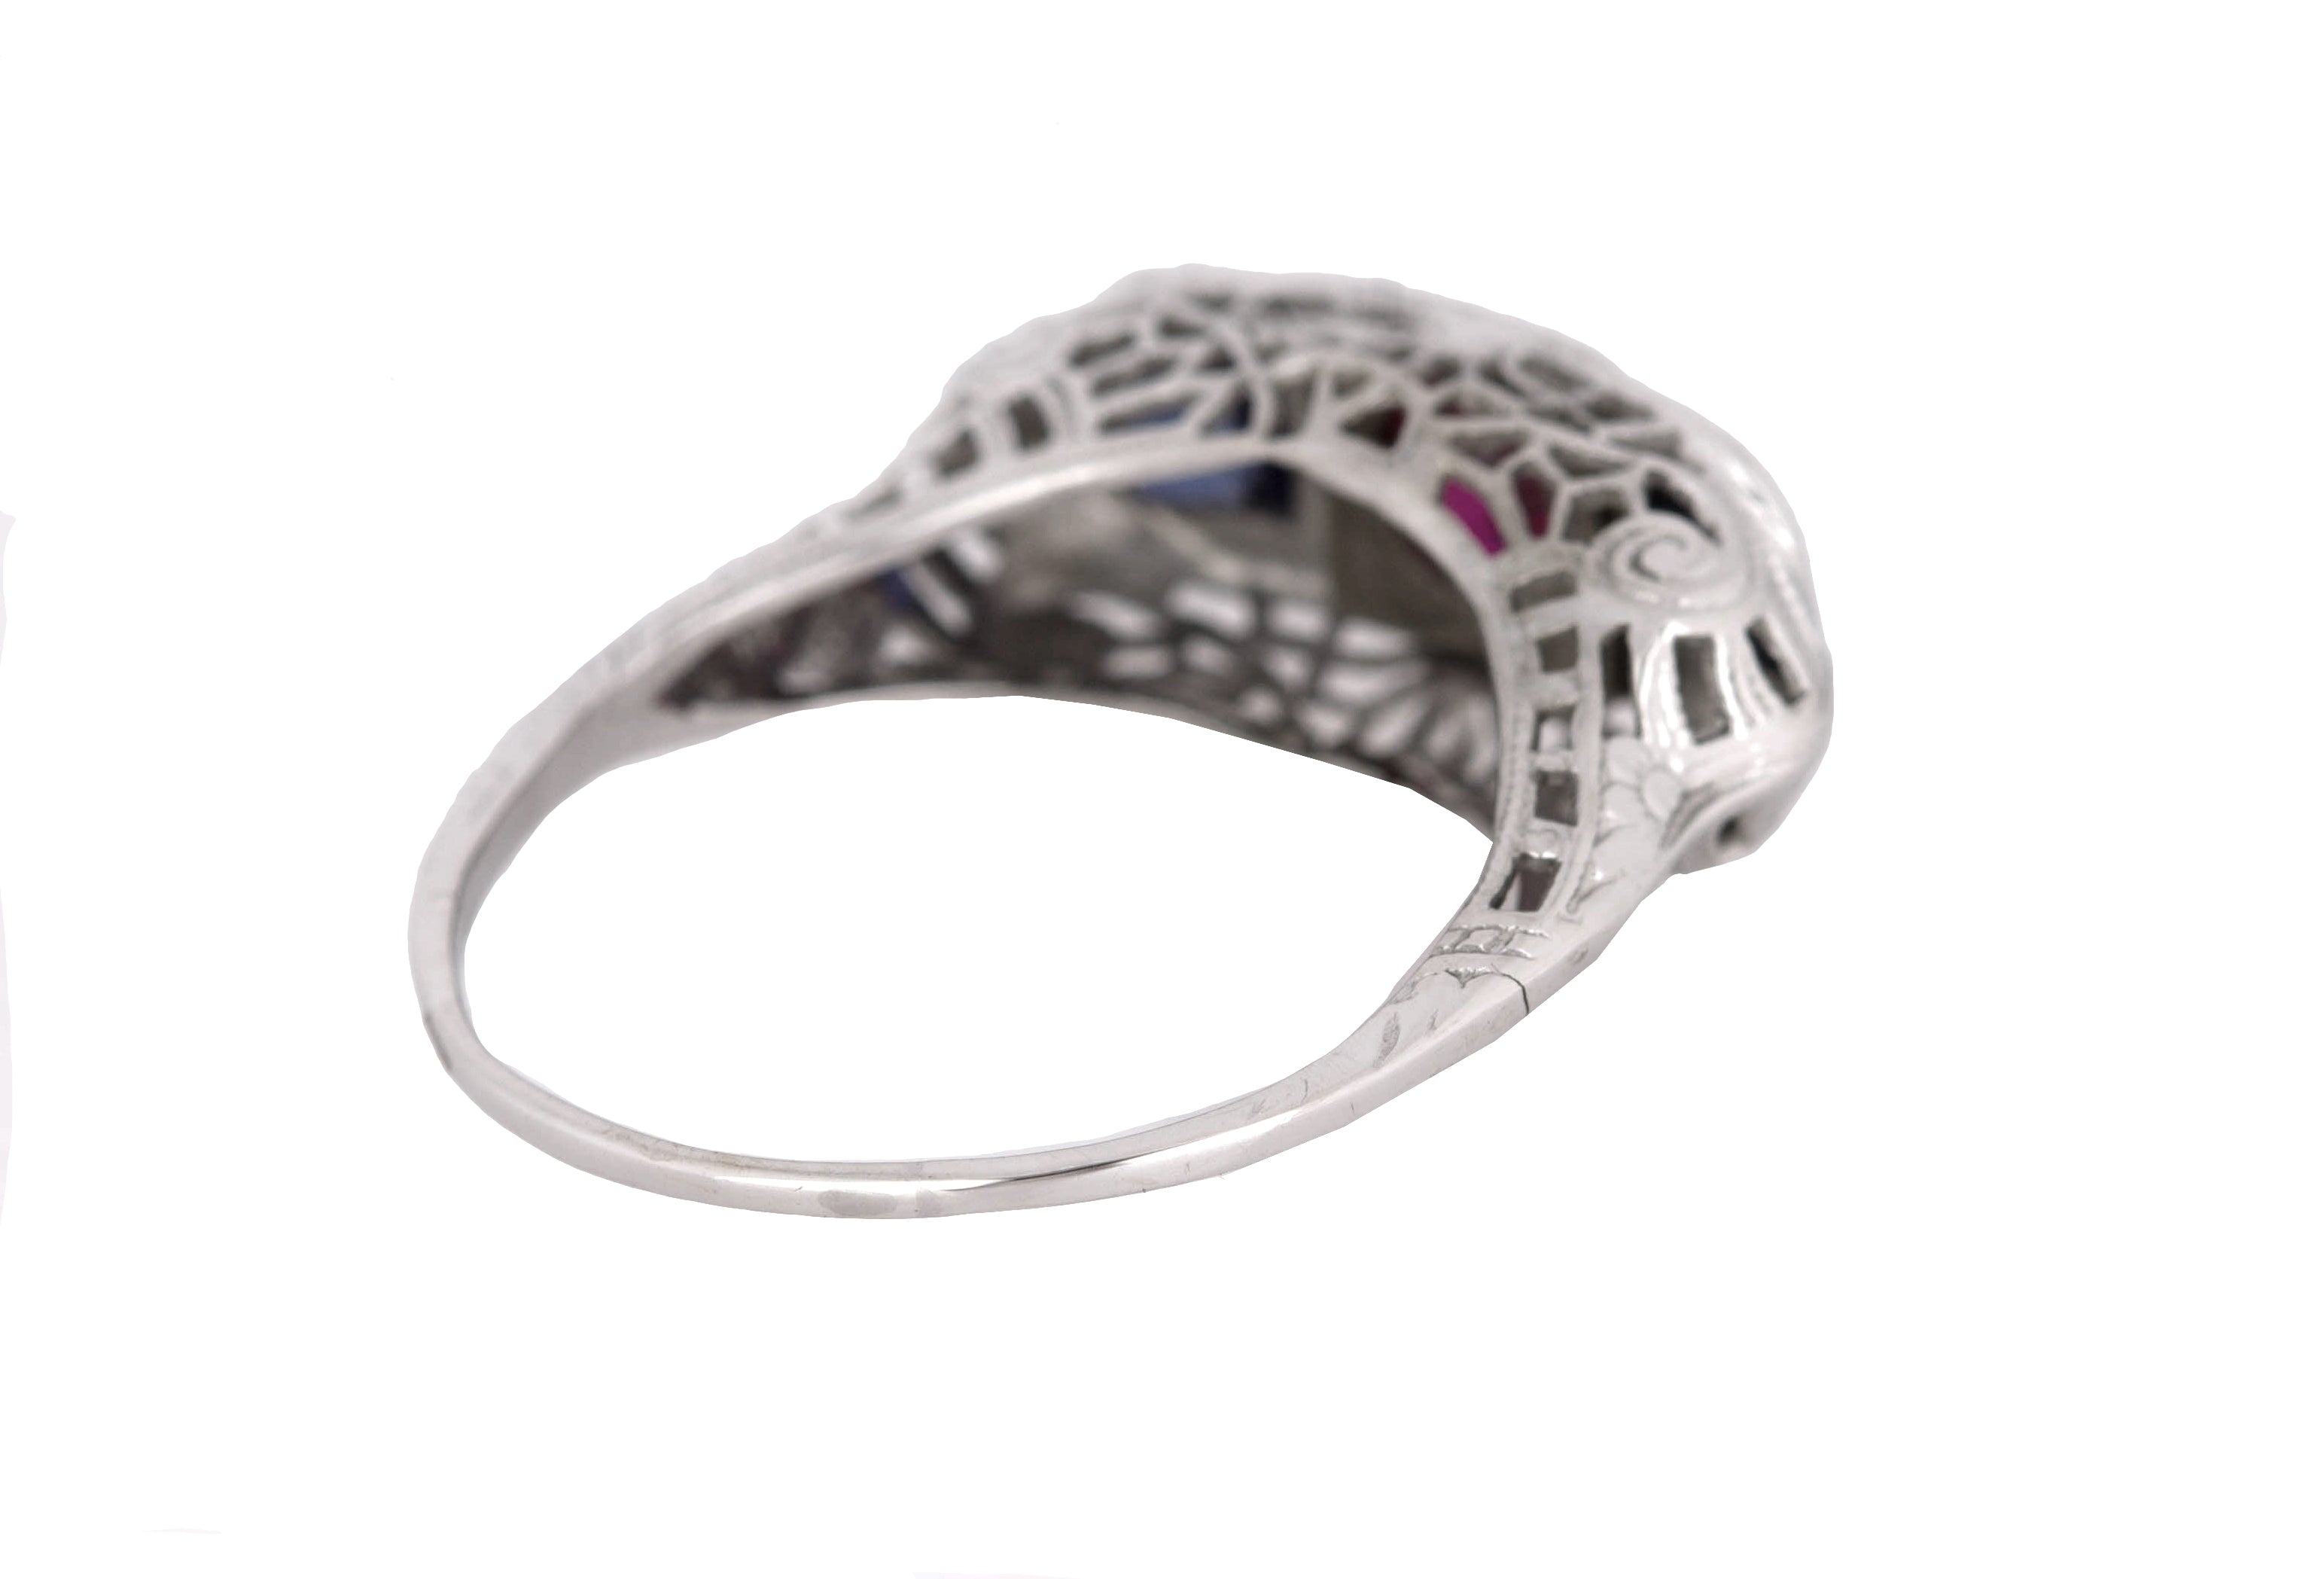 1930s Antique Art Deco 14k White Gold Lab-Created Ruby & Sapphire Filigree Ring